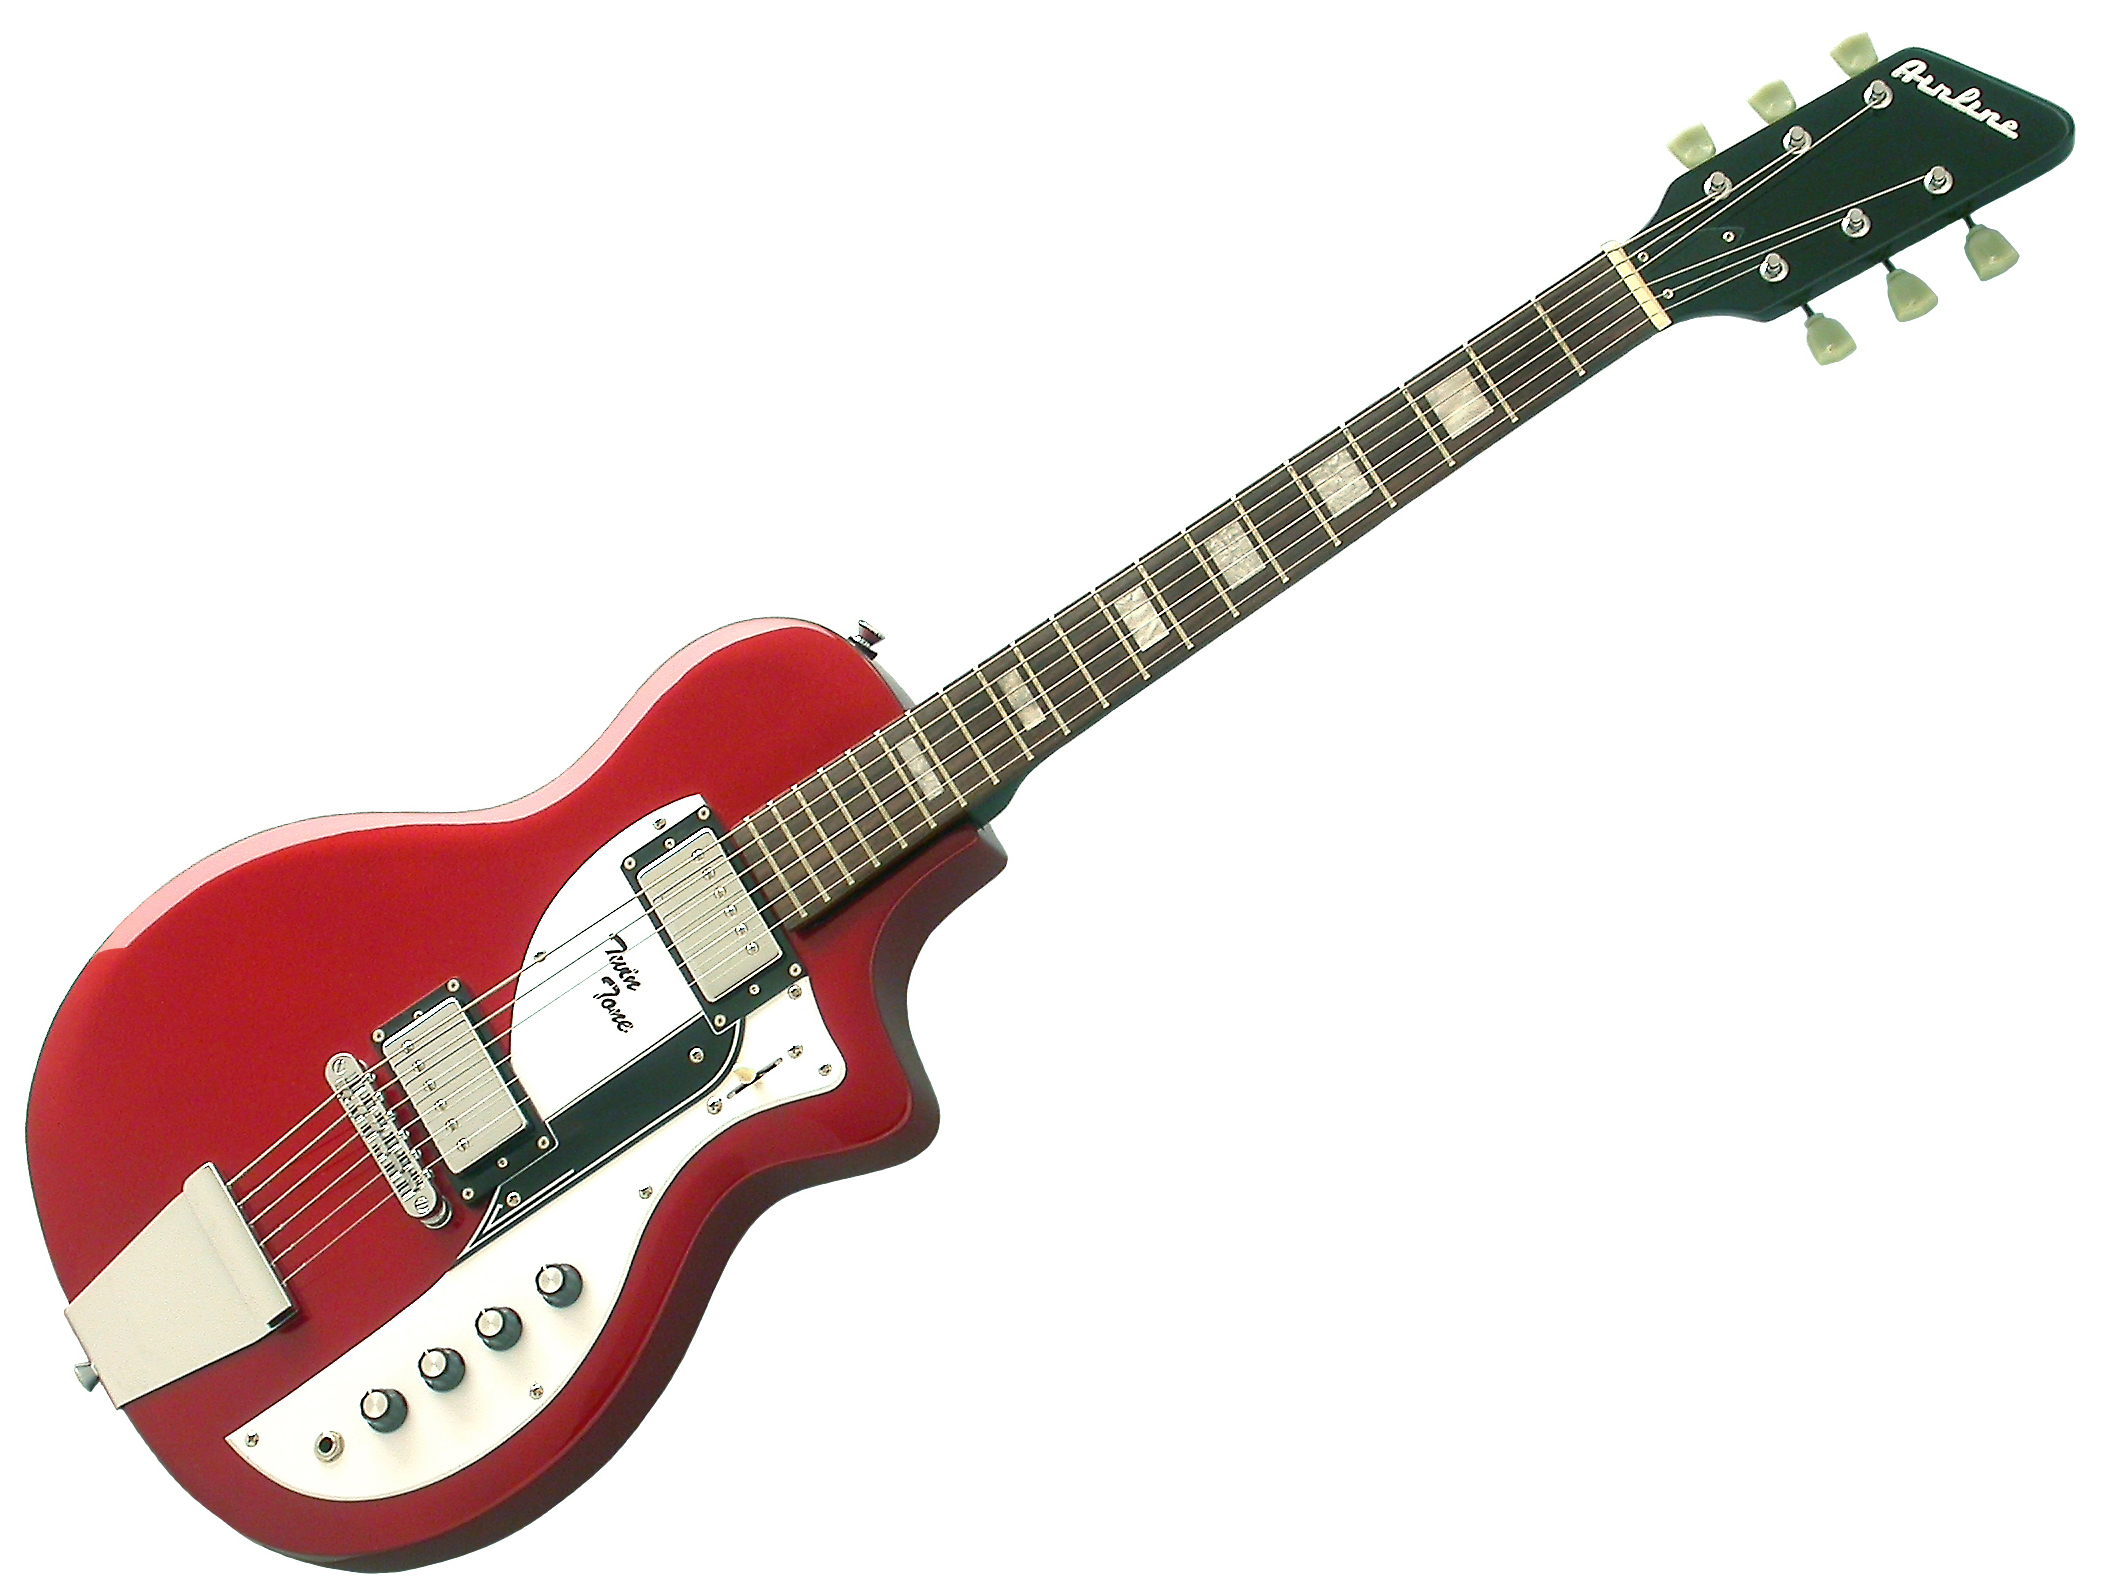 airline-twin-tone-guitar-red.jpg